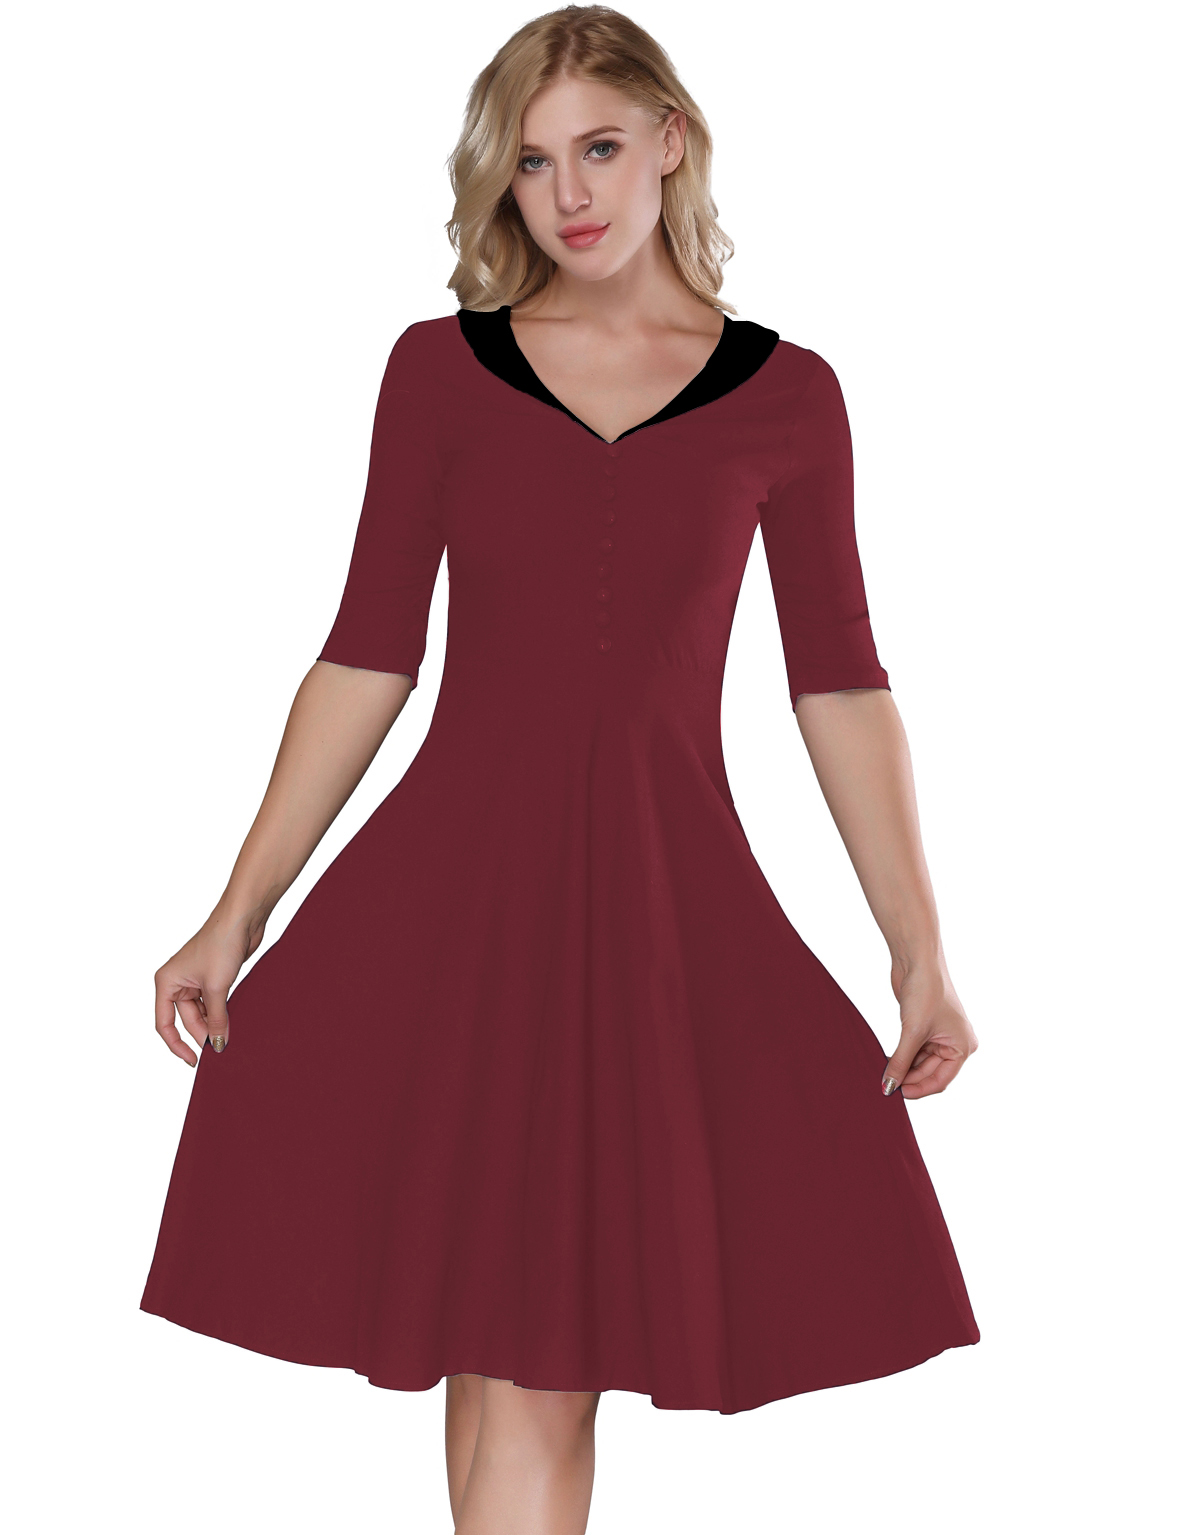 F2529-2 Wine Red & Black   Retro Vintage Style Cocktail Party Swing Dress